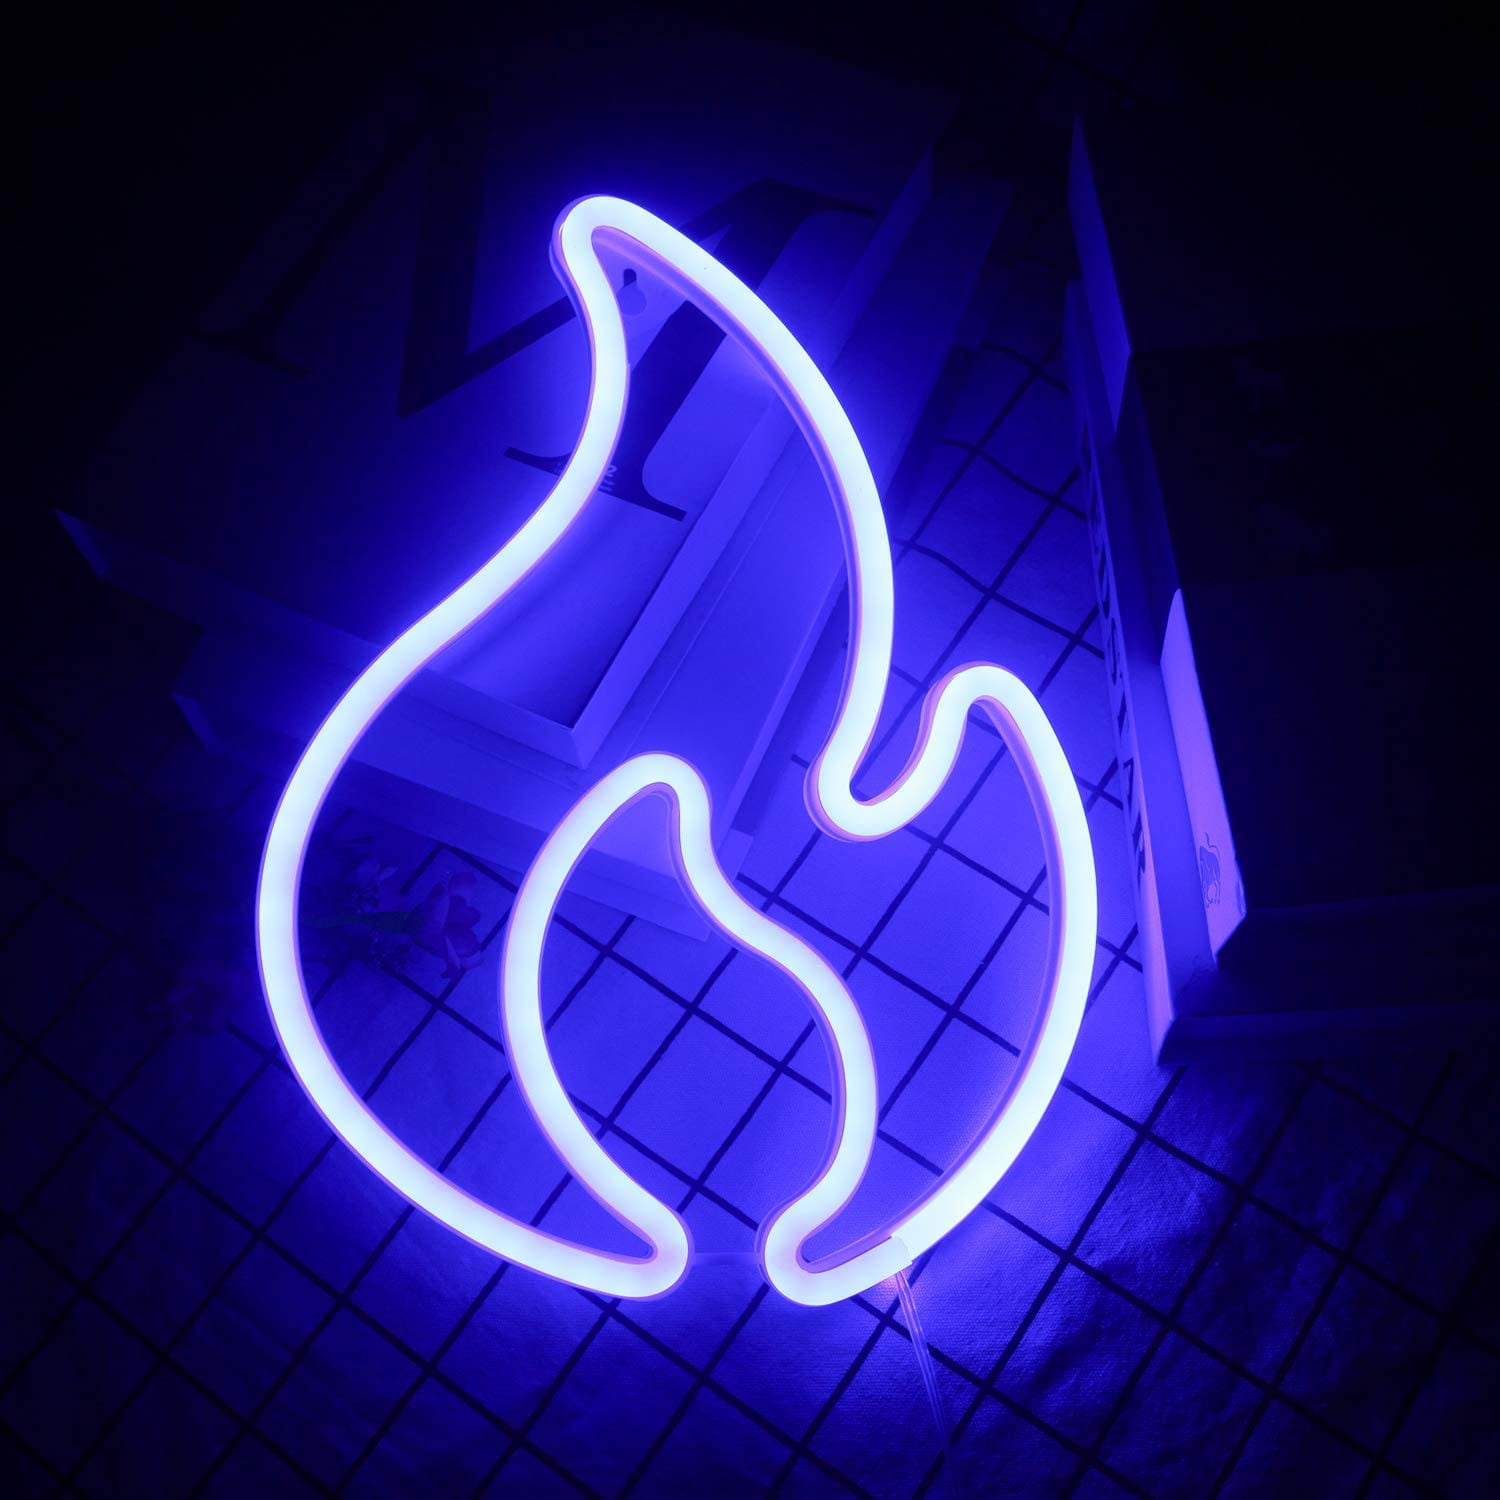 FONGWA Flame Neon Signs for Wall Decor, Fire LED Neon Light Signs for Bedroom, Blue USB/Battery Aesthetic Cool Hanging Neon Night Light for Boys Room, Party, Bar, Birthday Gift (Blue) -